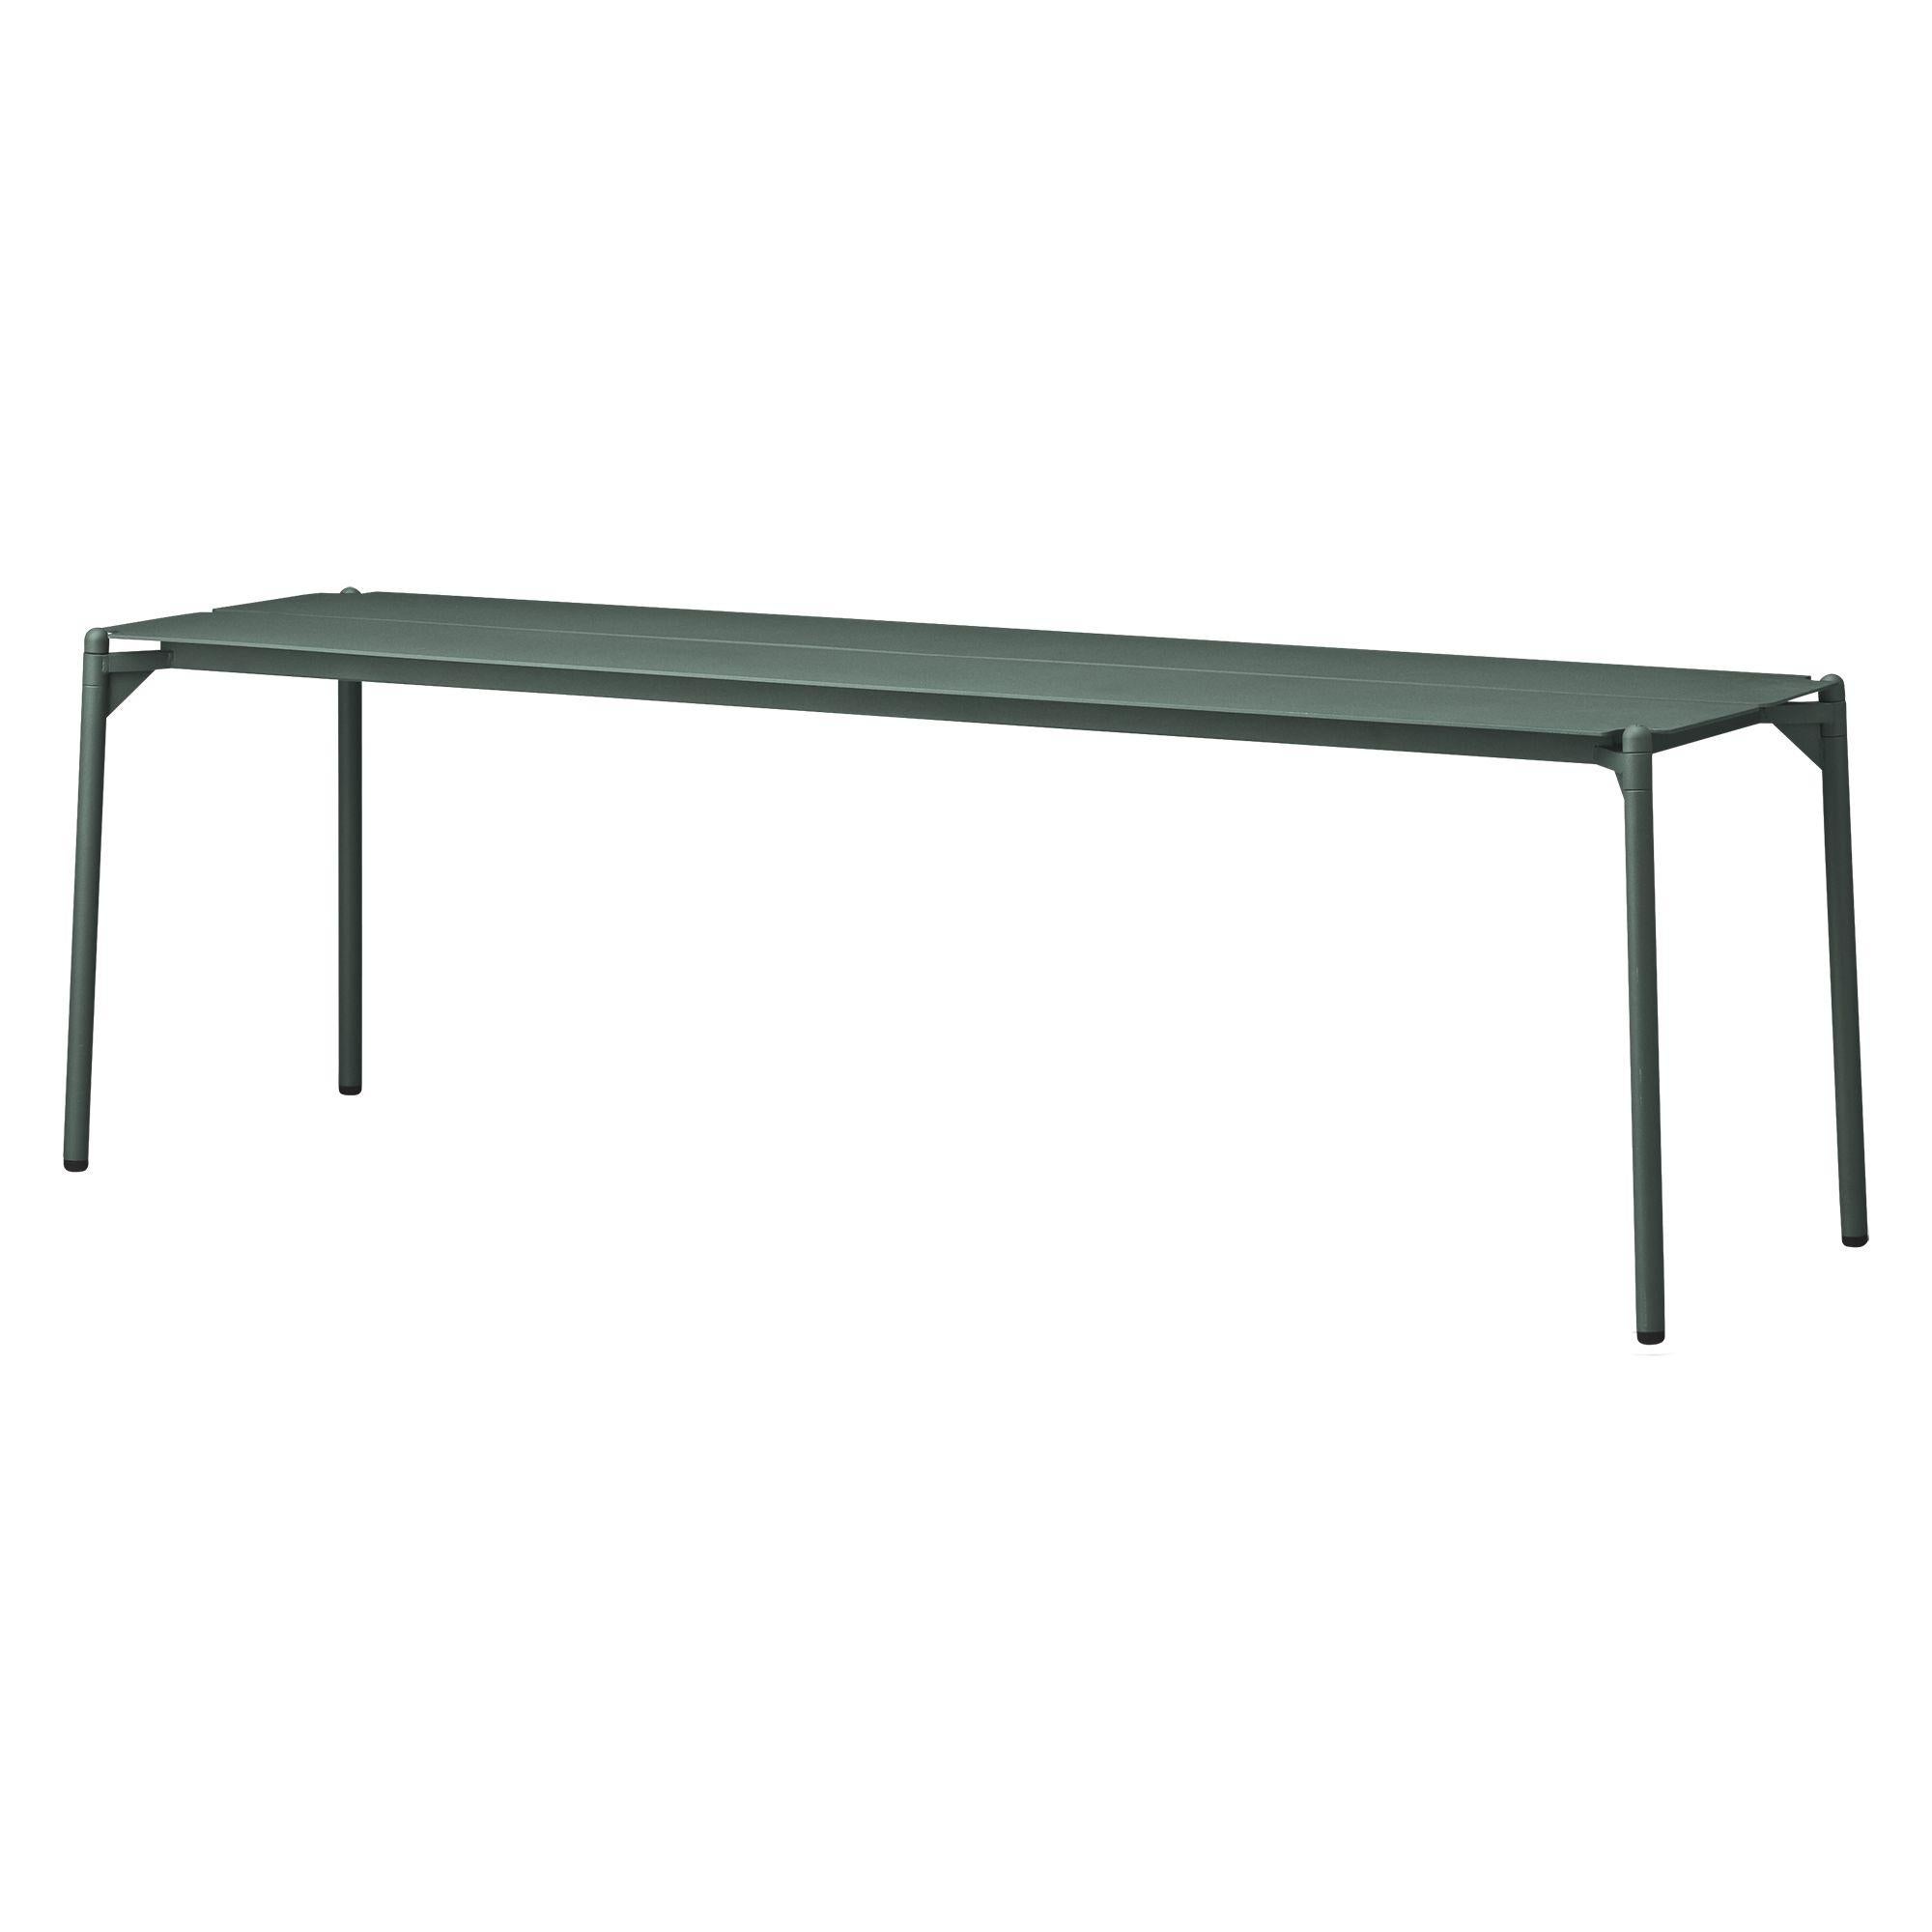 Forest Minimalist bench
Dimensions: D 145 x W 43.3 x H 45.5 cm 
Materials: Steel w. Matte powder coating & aluminum w. Matte powder coating.
Available in colors: Taupe, bordeaux, forest, ginger bread, black and, black and gold.

With NOVO bench